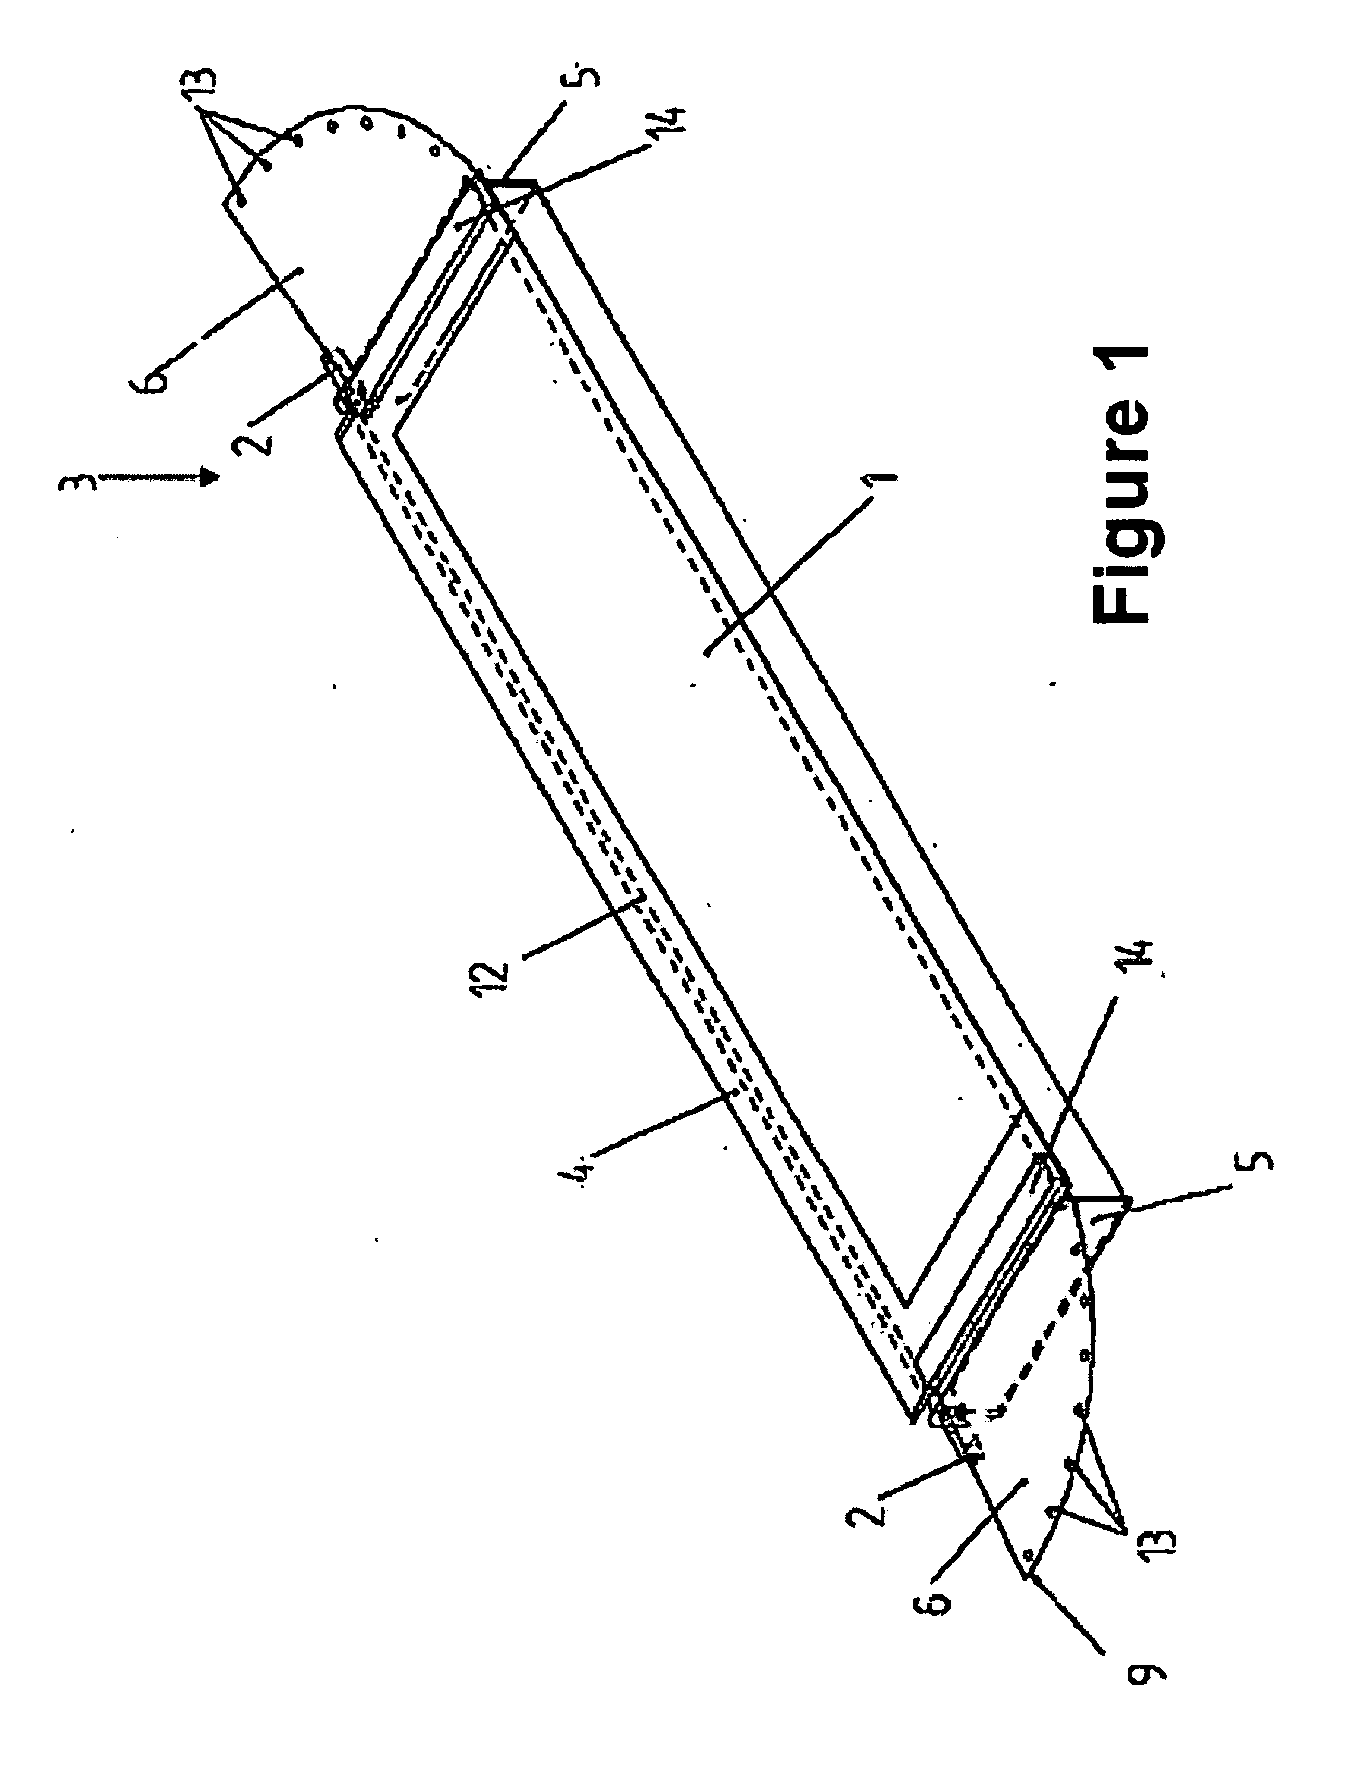 Hinged Partition and Arrangement for Closing Off a Room Against a Fluid Flowing into the Room or Out of the Room